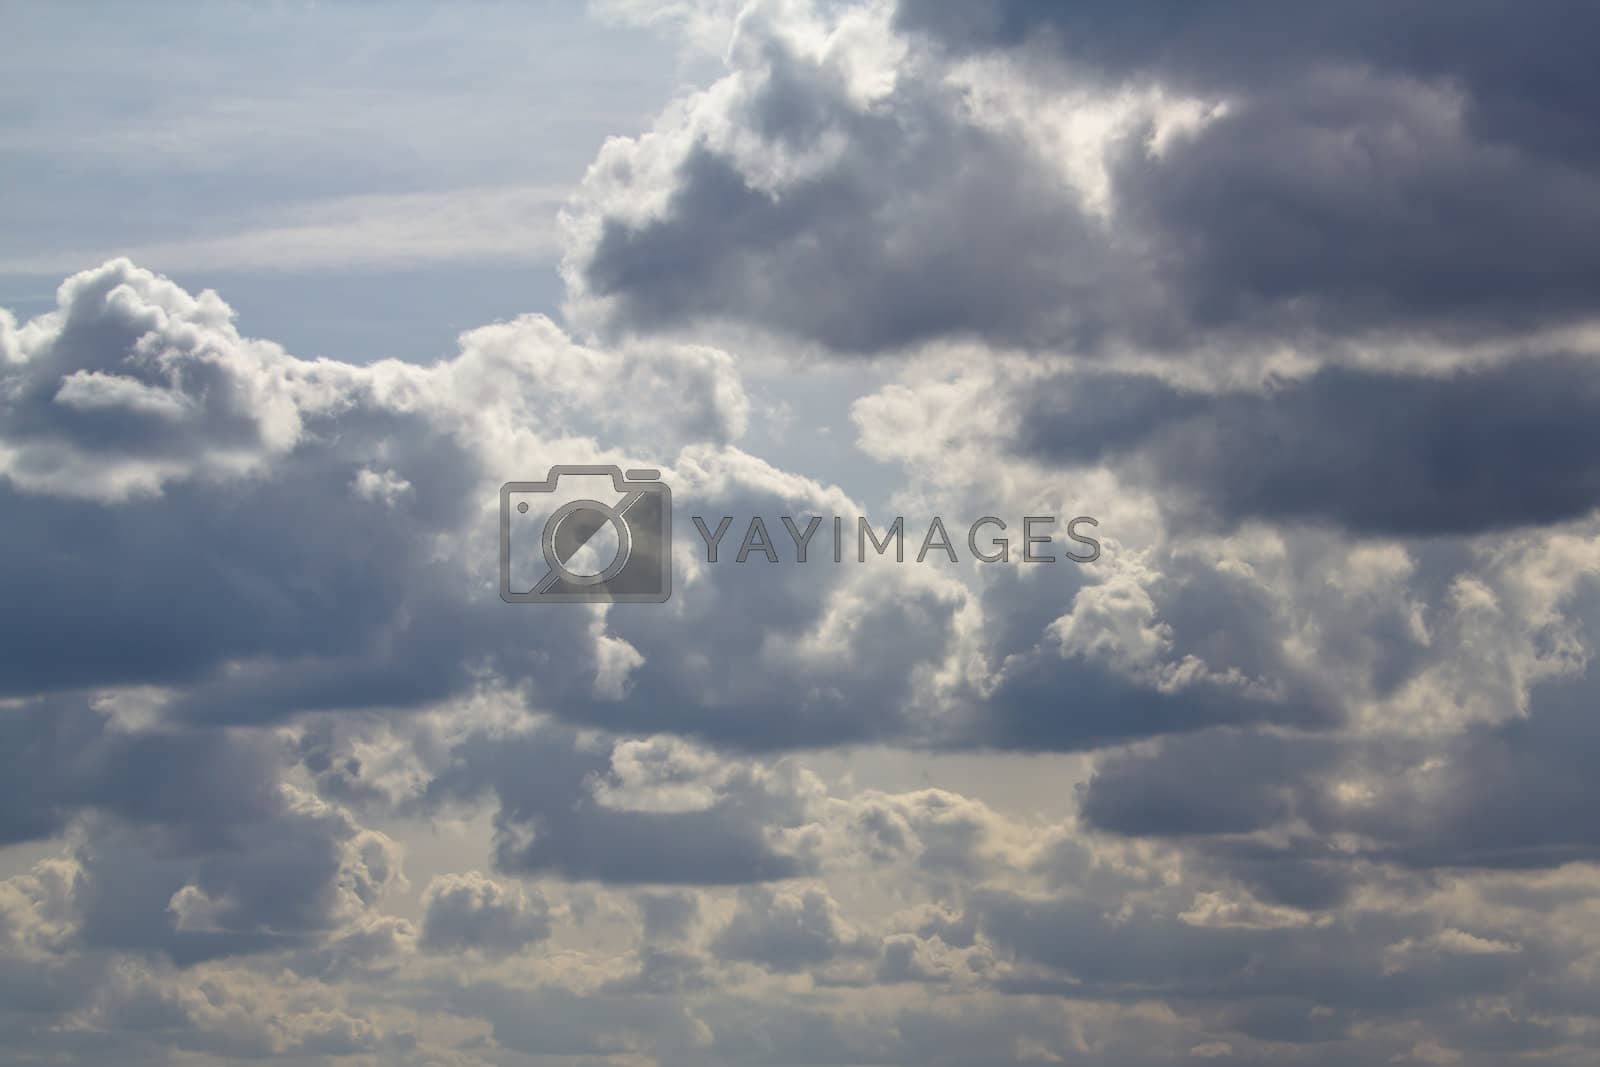 Royalty free image of Cloudscapes by cflux